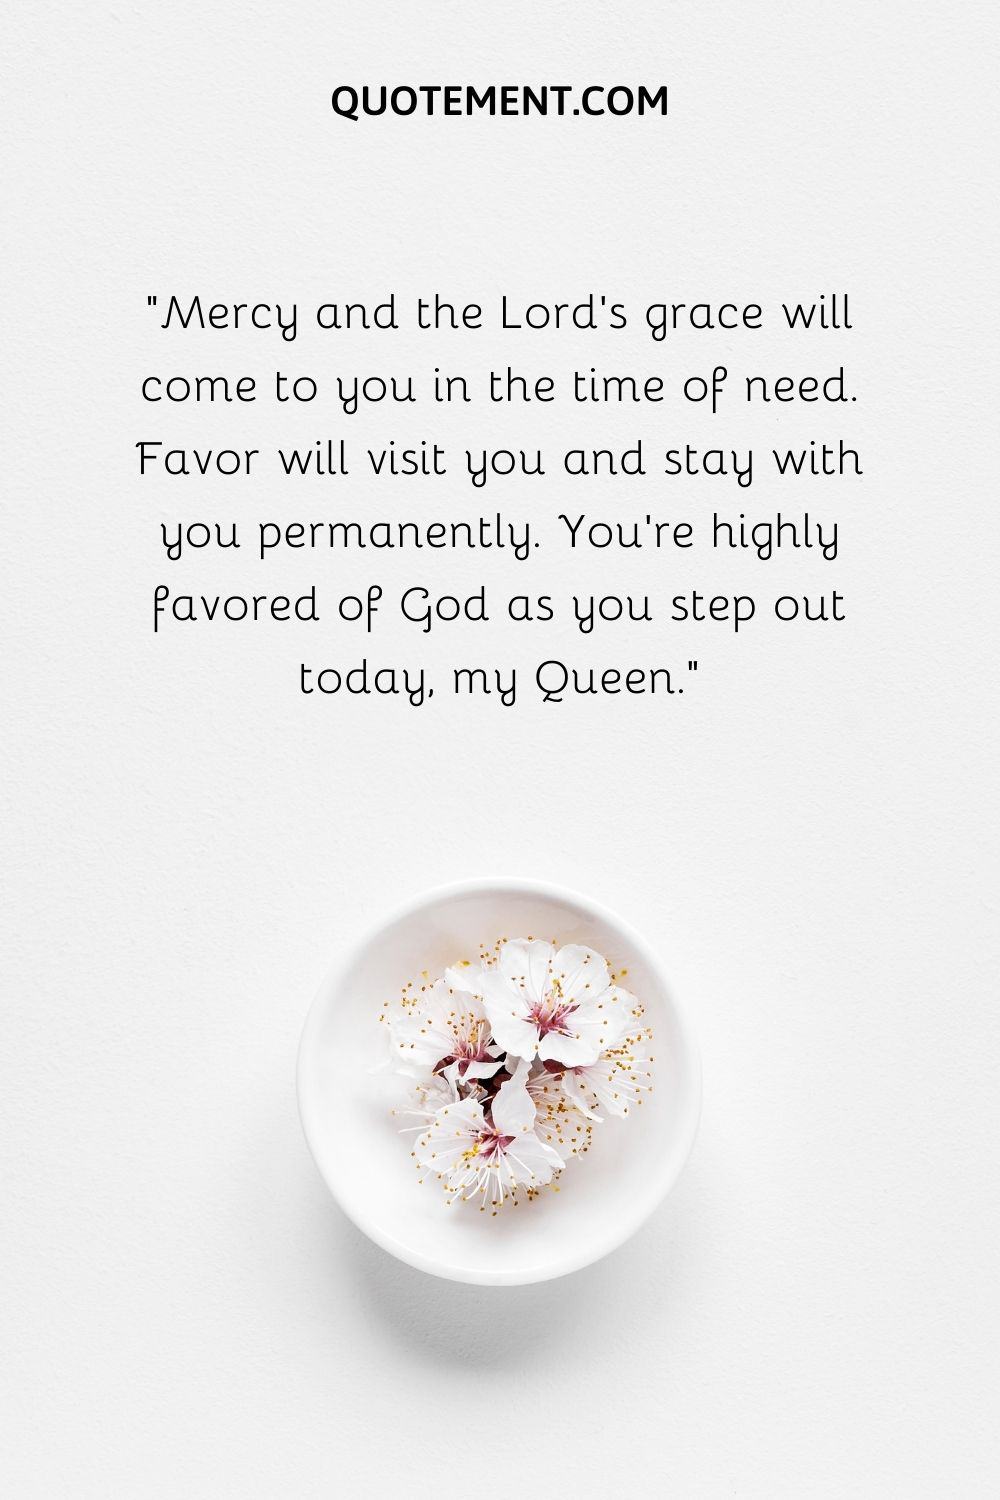 Mercy and the Lord’s grace will come to you in the time of need